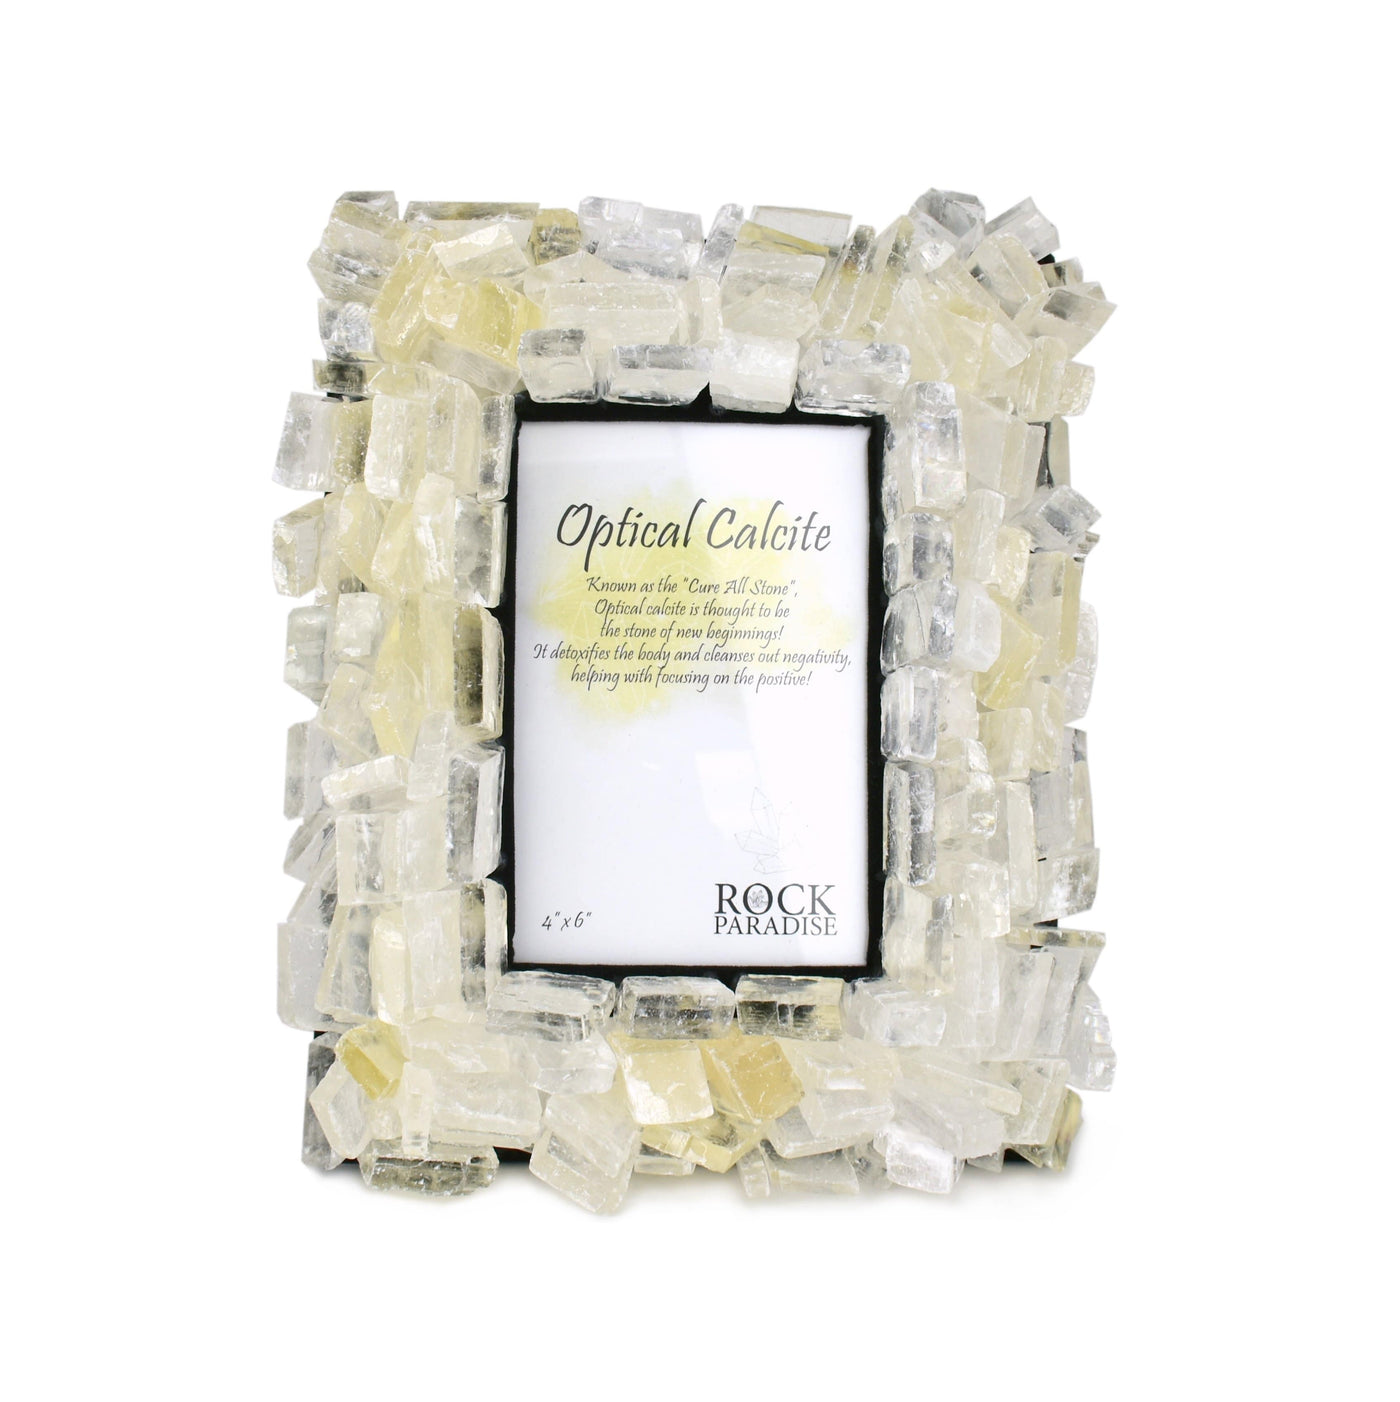 Stone Picture Frame - optical calcite on a table